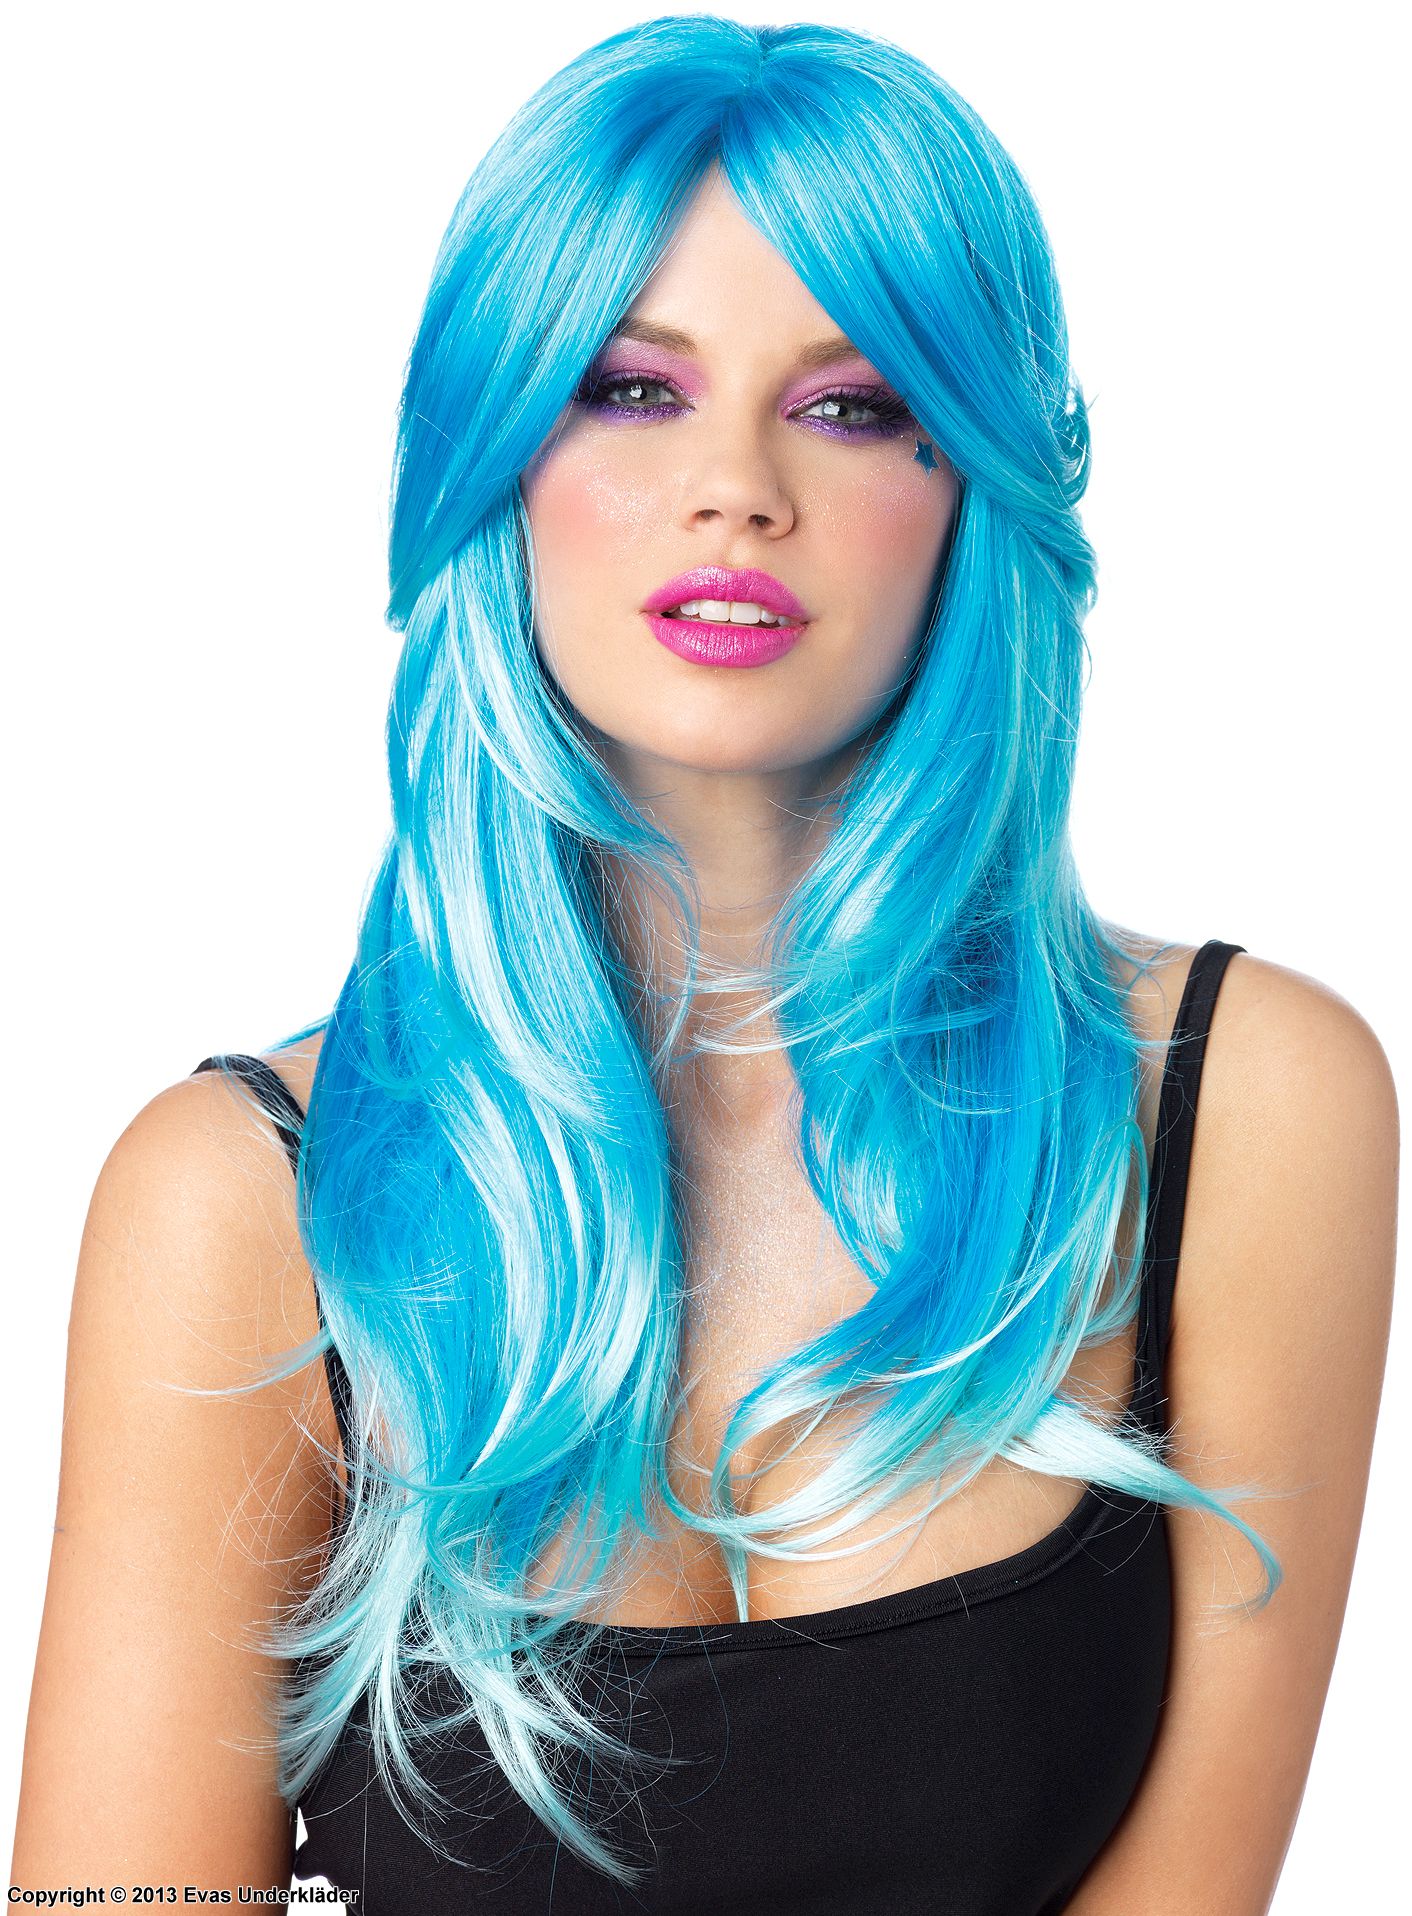 Two-Tone Long Curly Wig